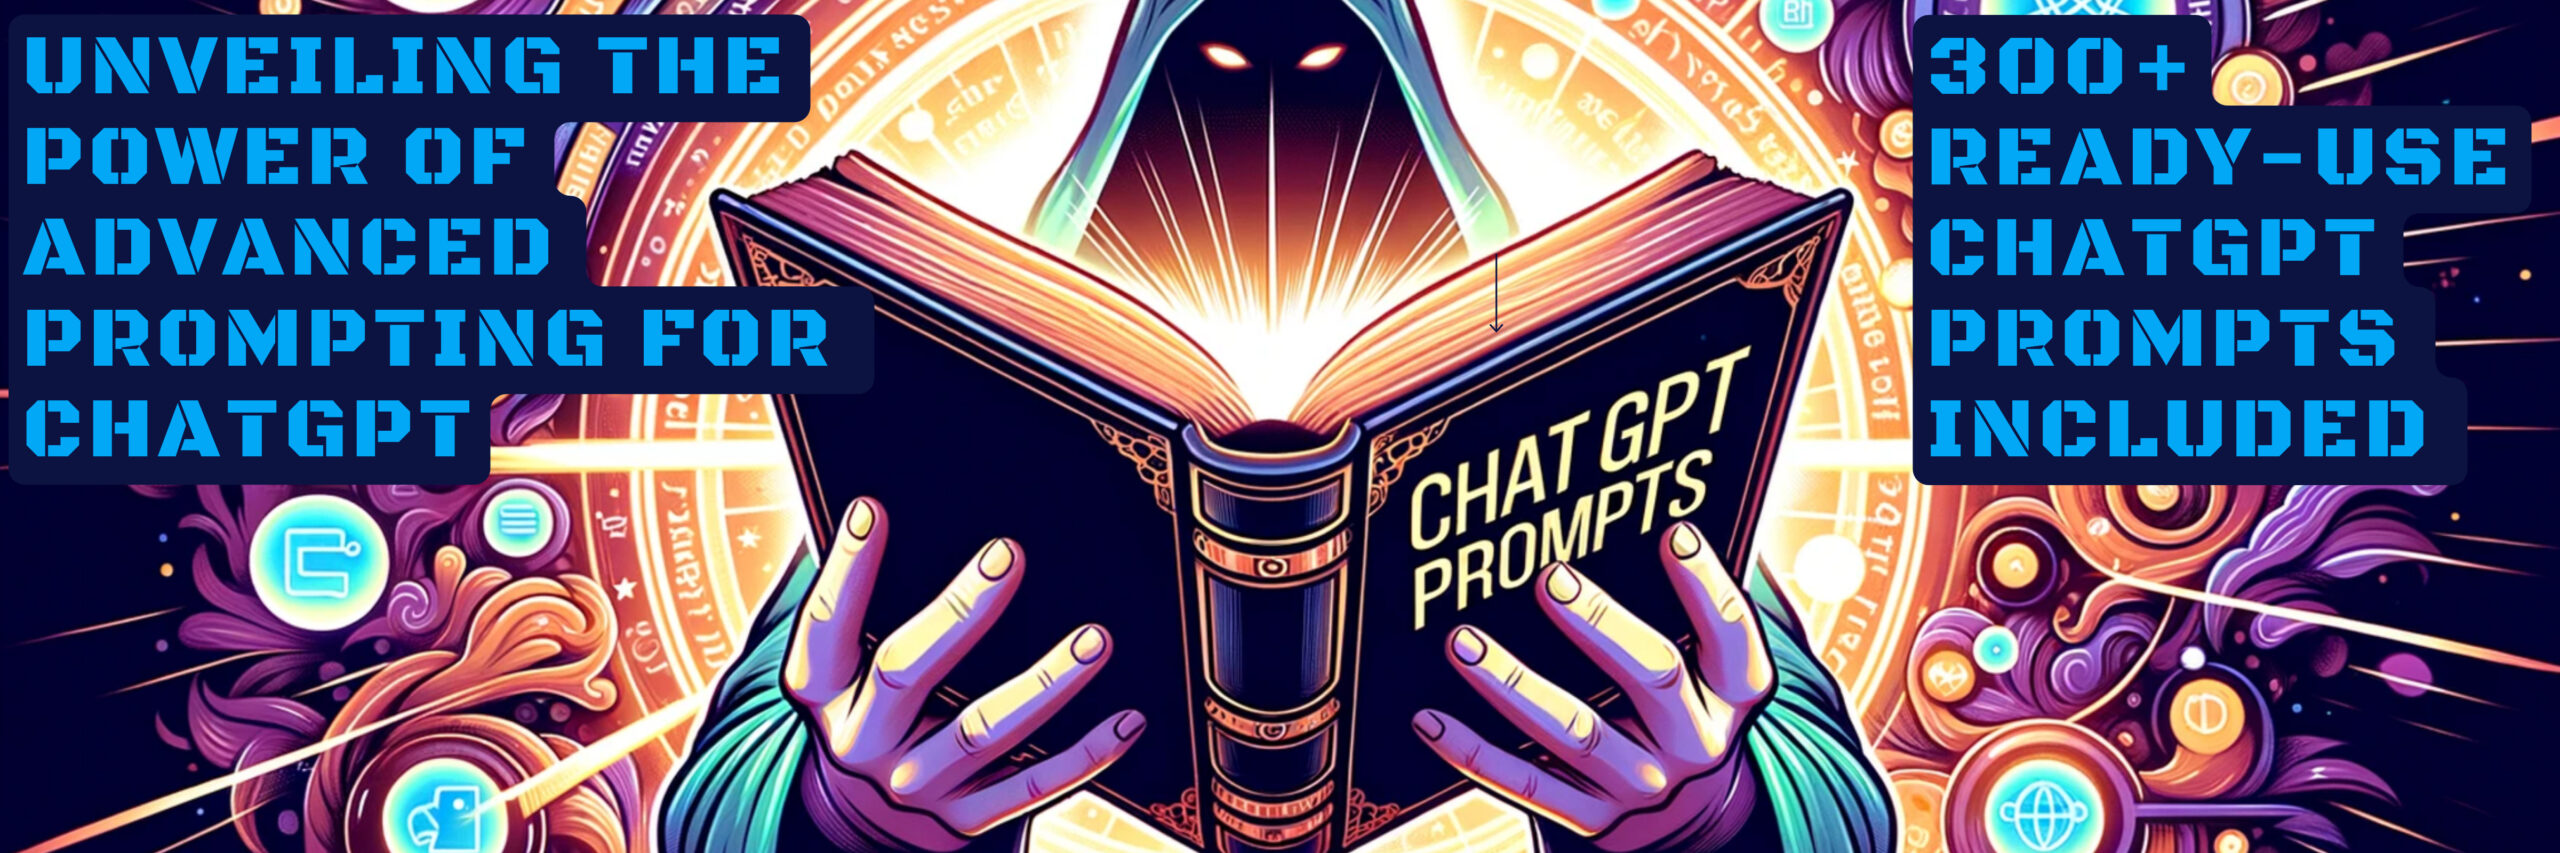 The Power of ChatGPT: A Dungeon Master's Guide to Enhancing D&D Games